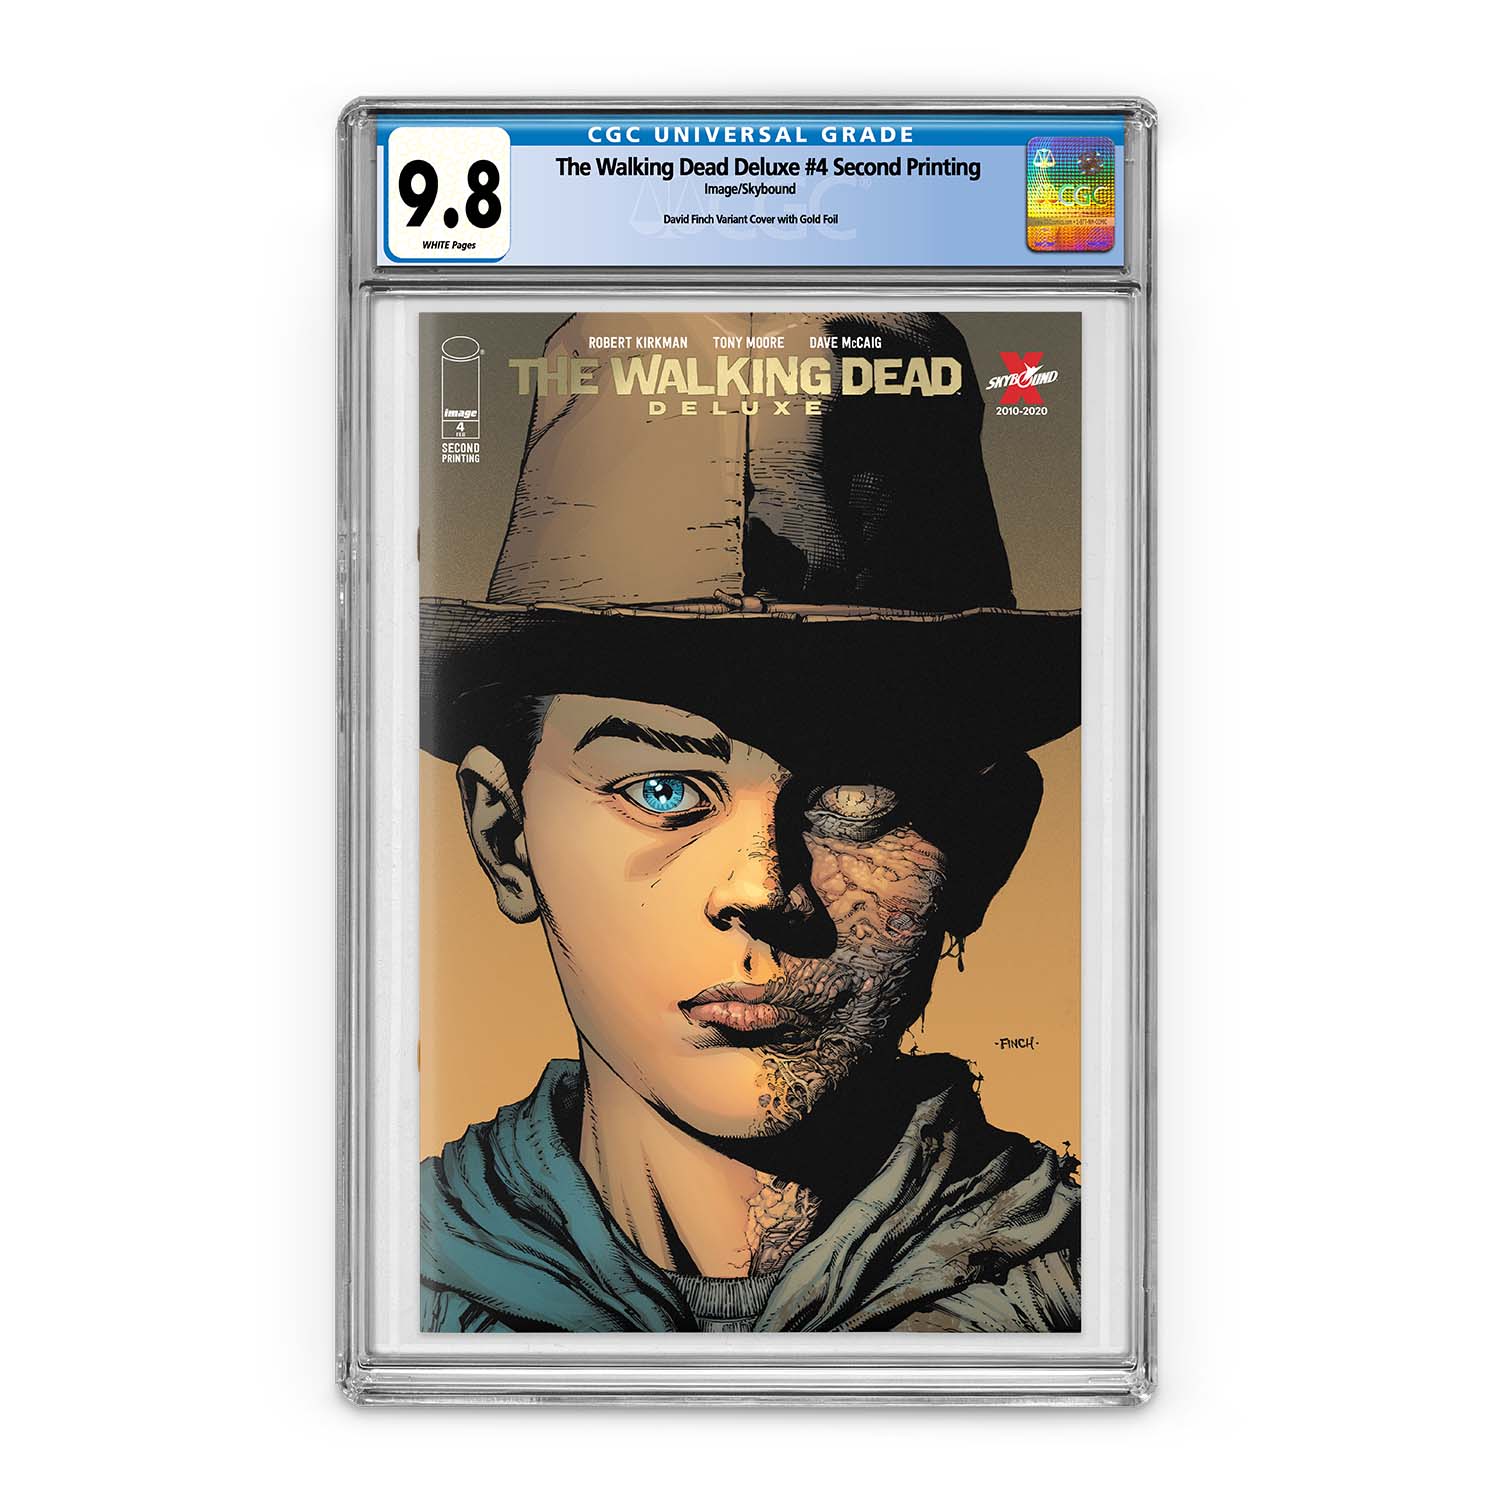 The Walking Dead Deluxe #4 Second Printing Color with Gold Foil Logo - CGC 9.8